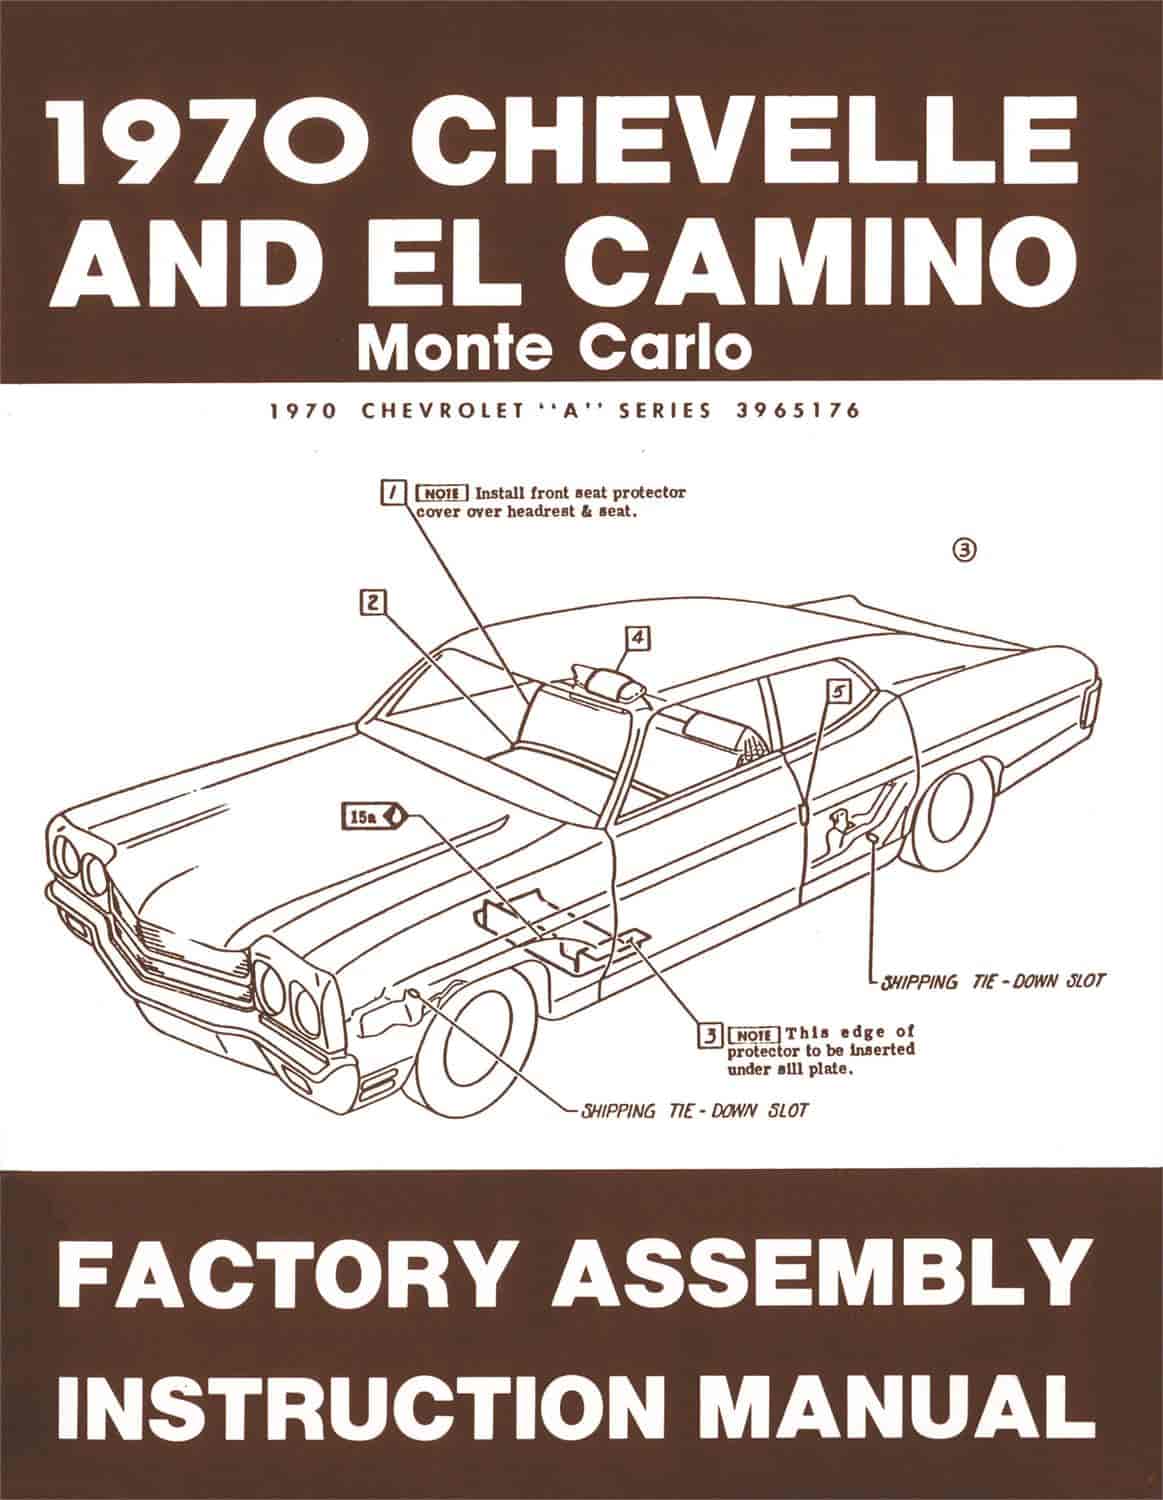 Factory Assembly Manual 1970 Chevy Chevelle, El Camino & Monte Carlo